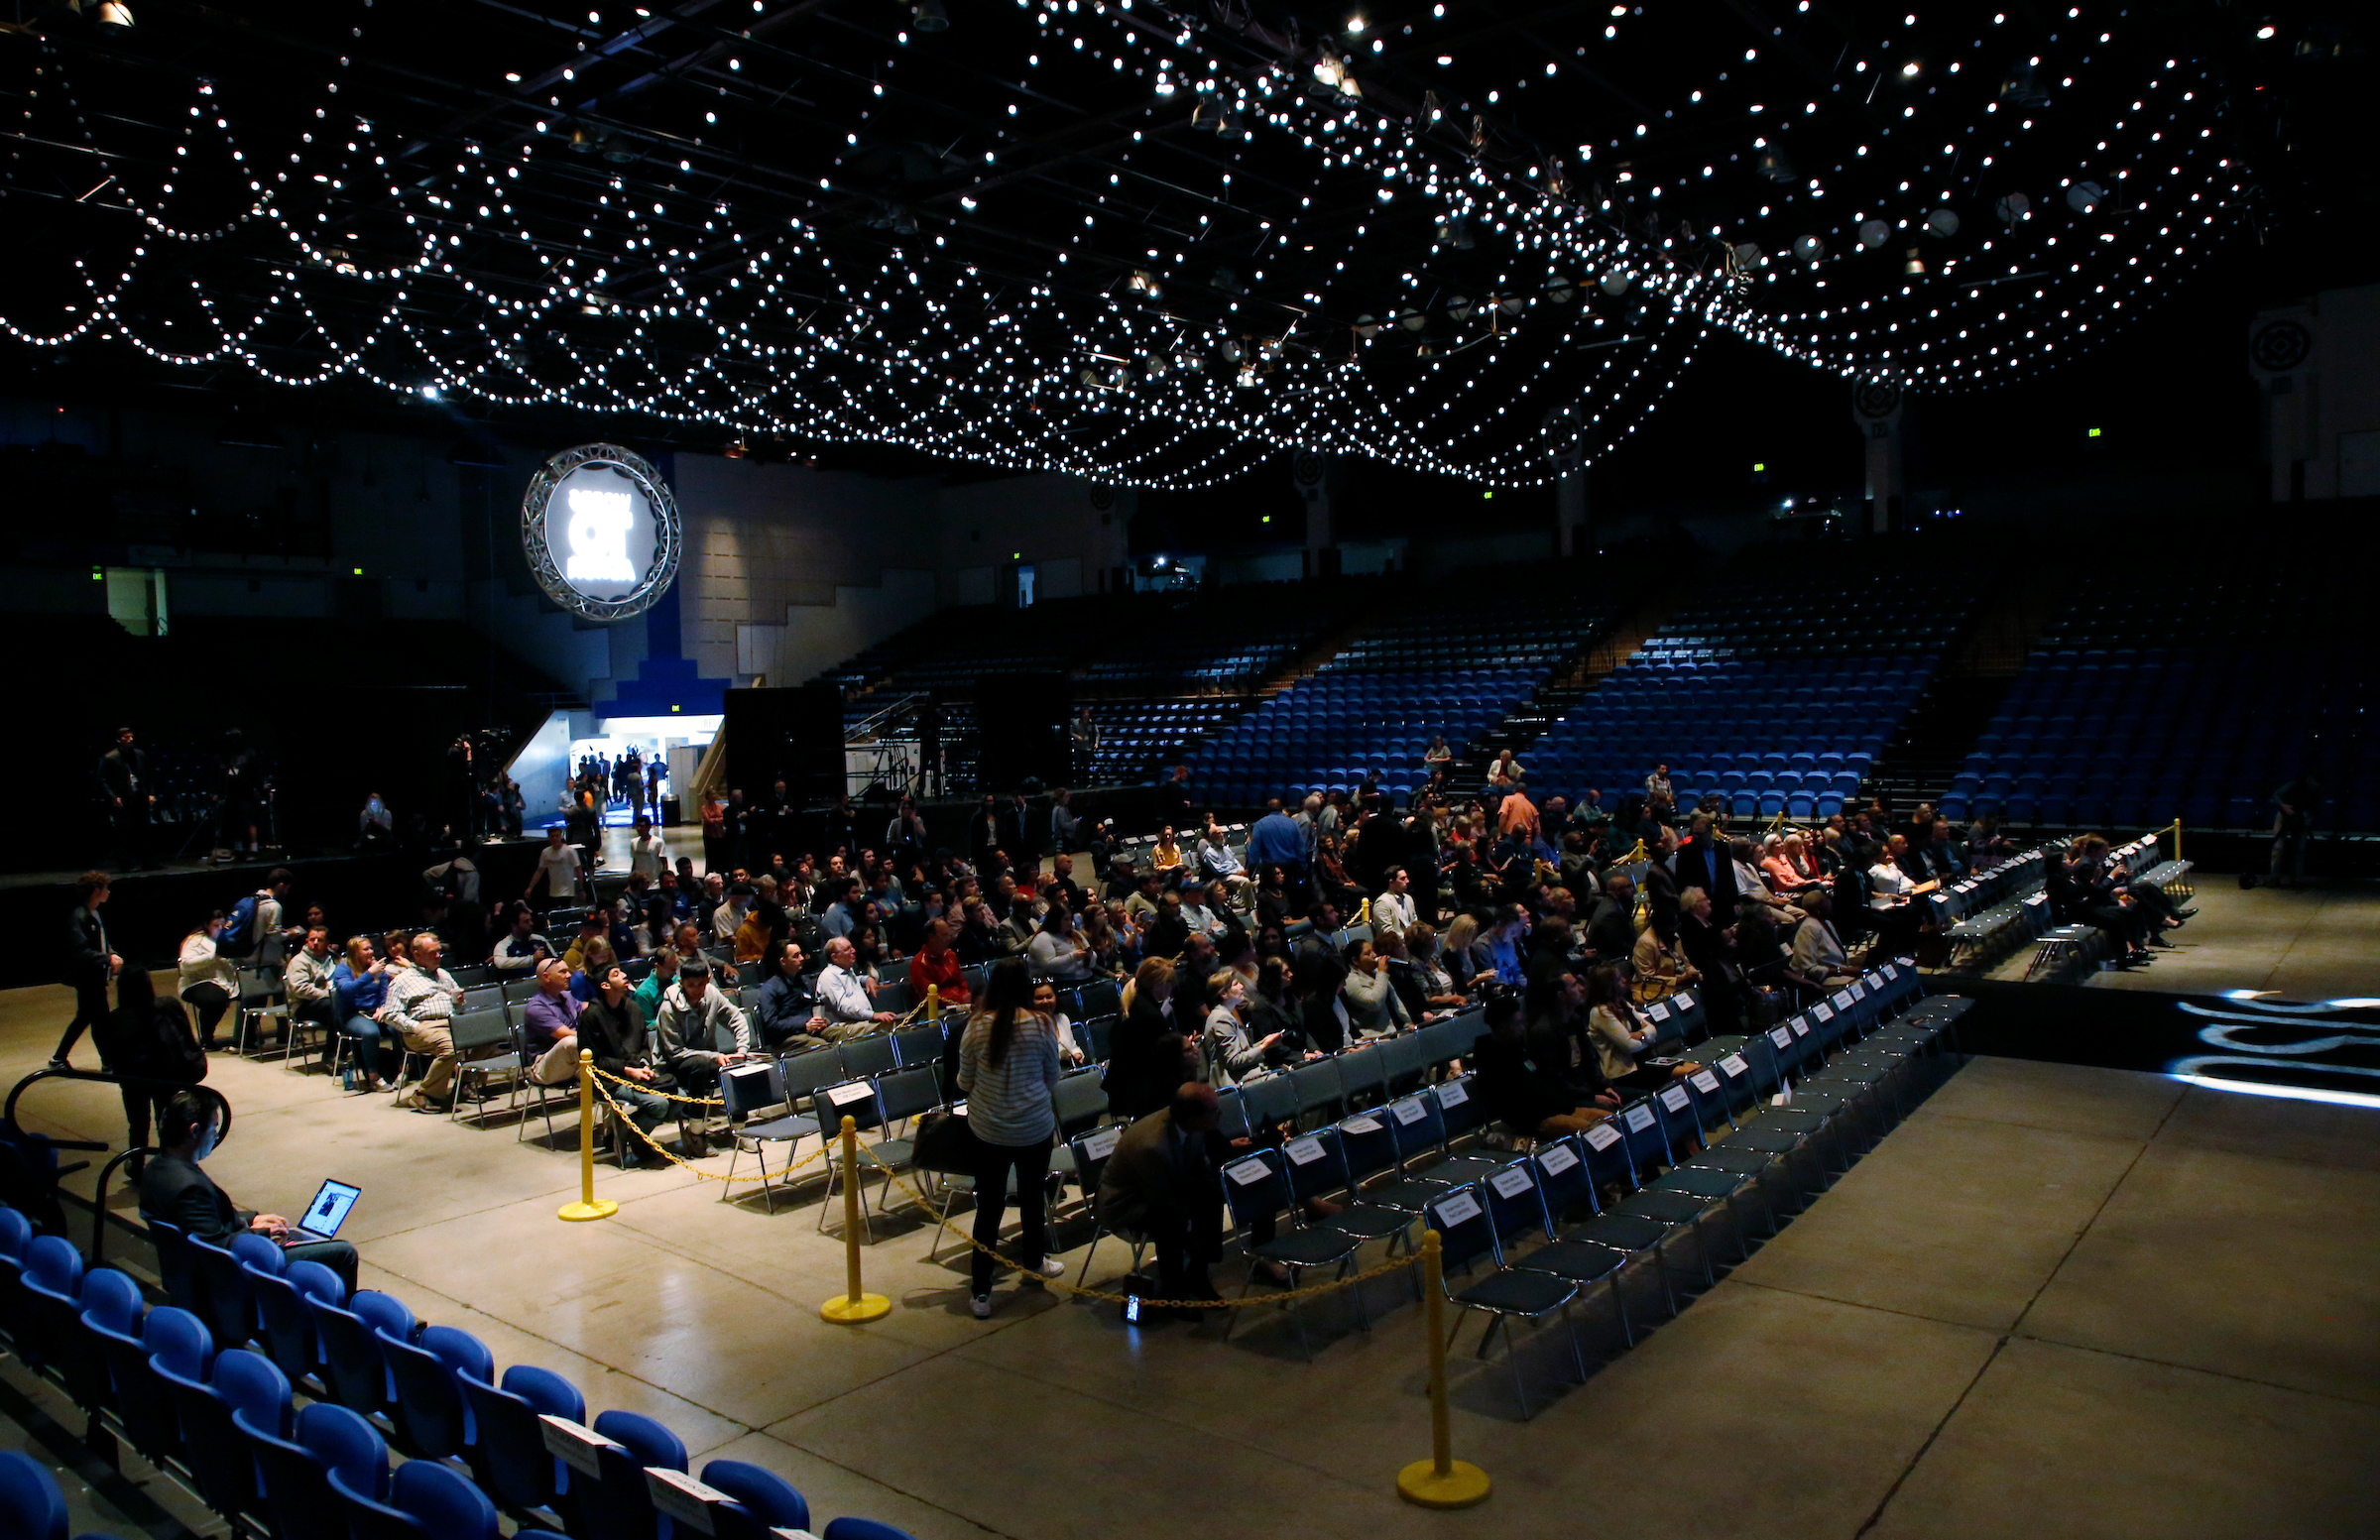 A crowd of people are seated inside a dark event center.